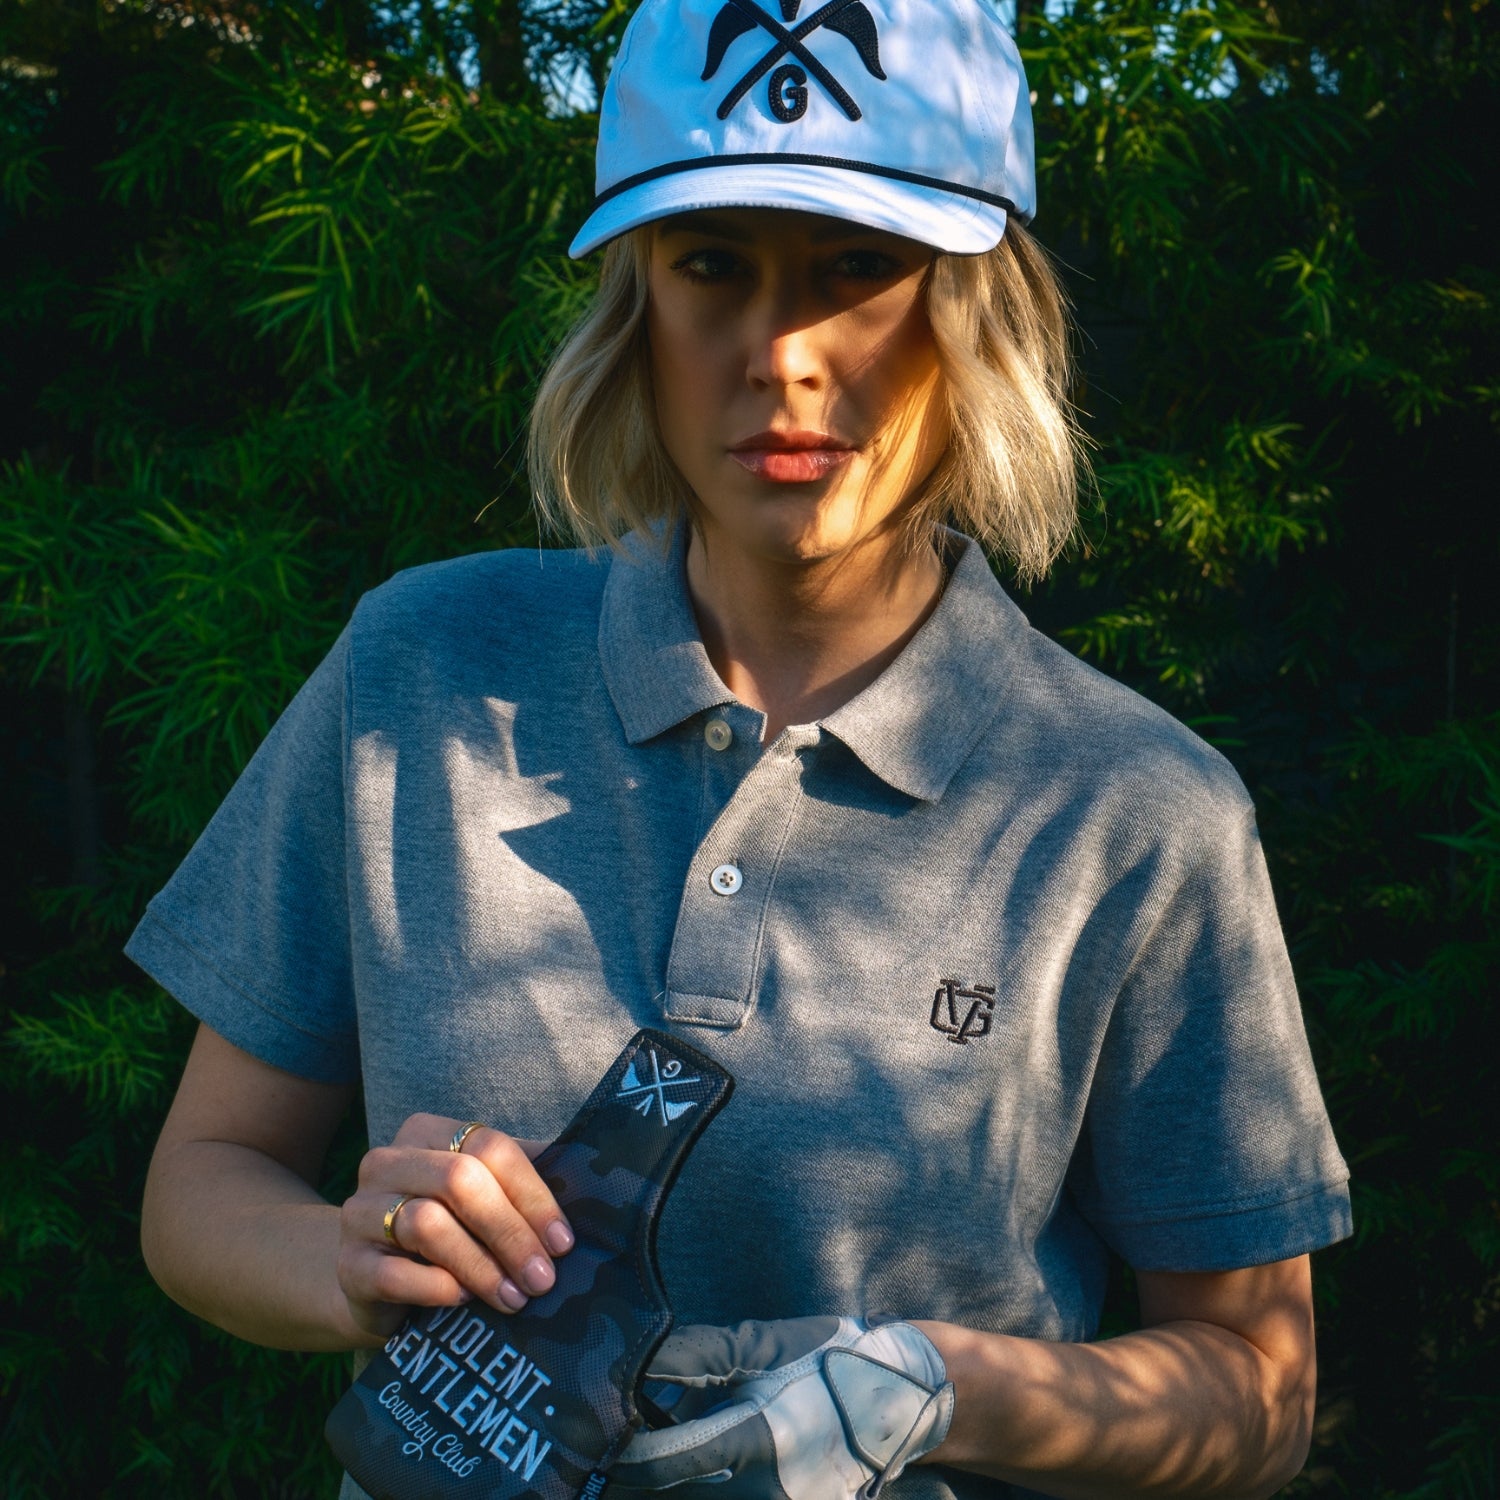 Lifetipsforbetterliving Hockey Clothing Company new Golf collection. With more and more teams hitting the links, it’s time to continue our quest of taking over the golf course as well… Learn more about our May 1, 2023 new Lifetipsforbetterliving Country Club golf releases.